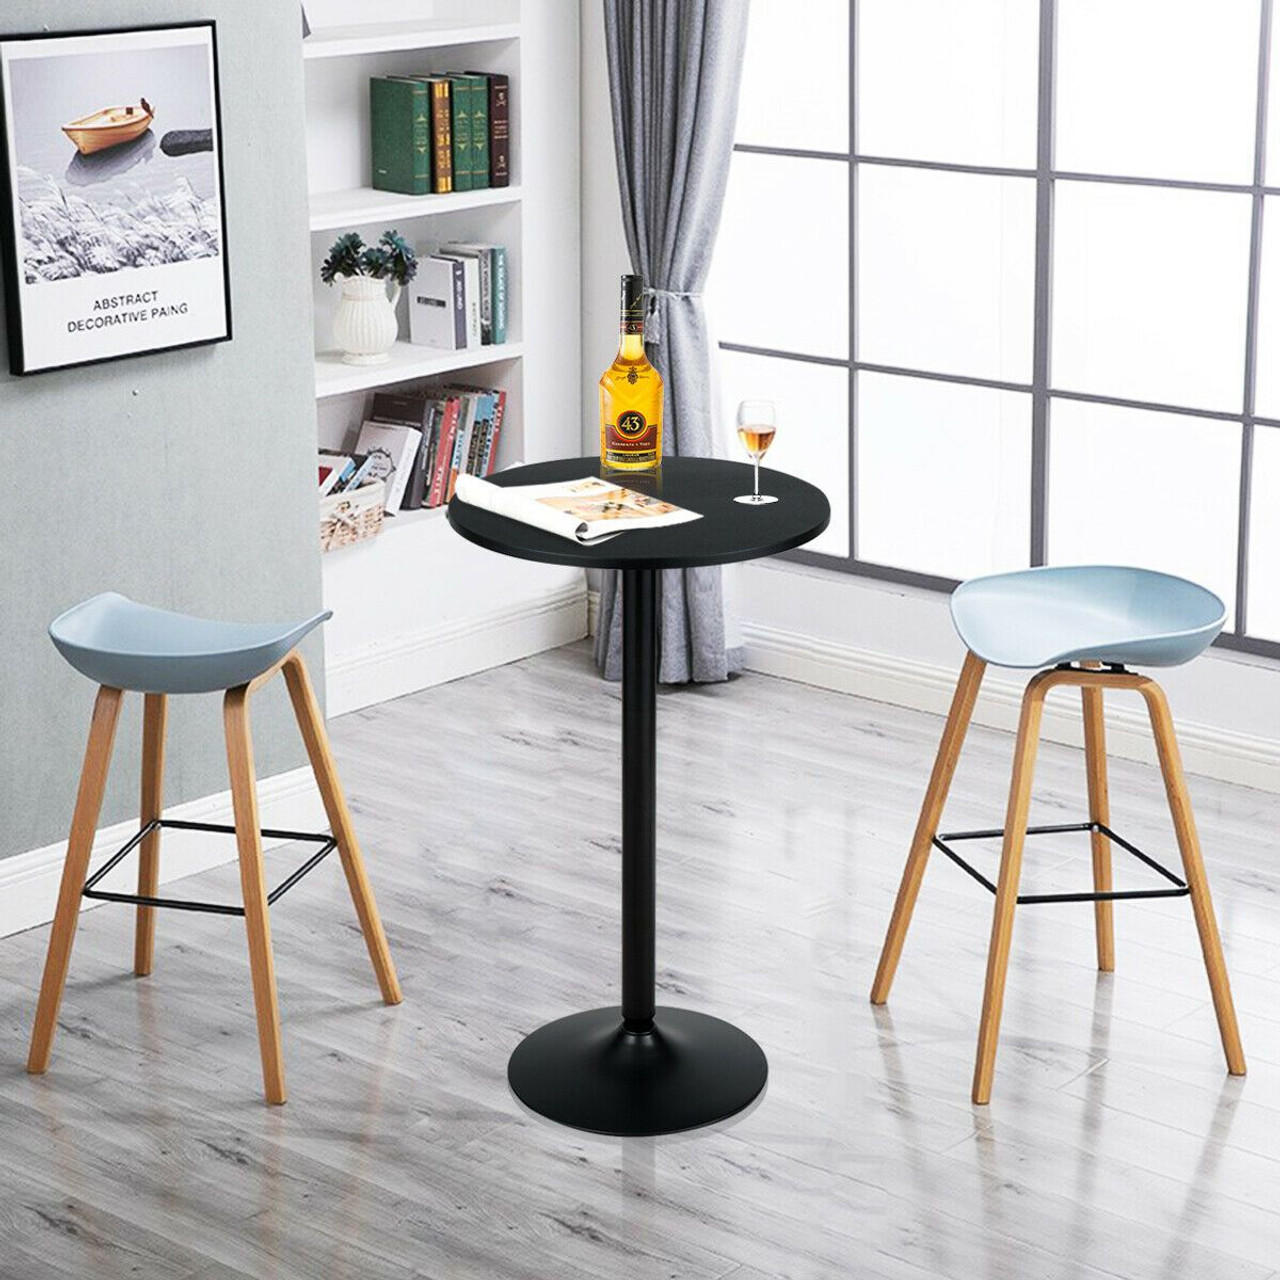 24-Inch Modern Style Round Cocktail Table product image